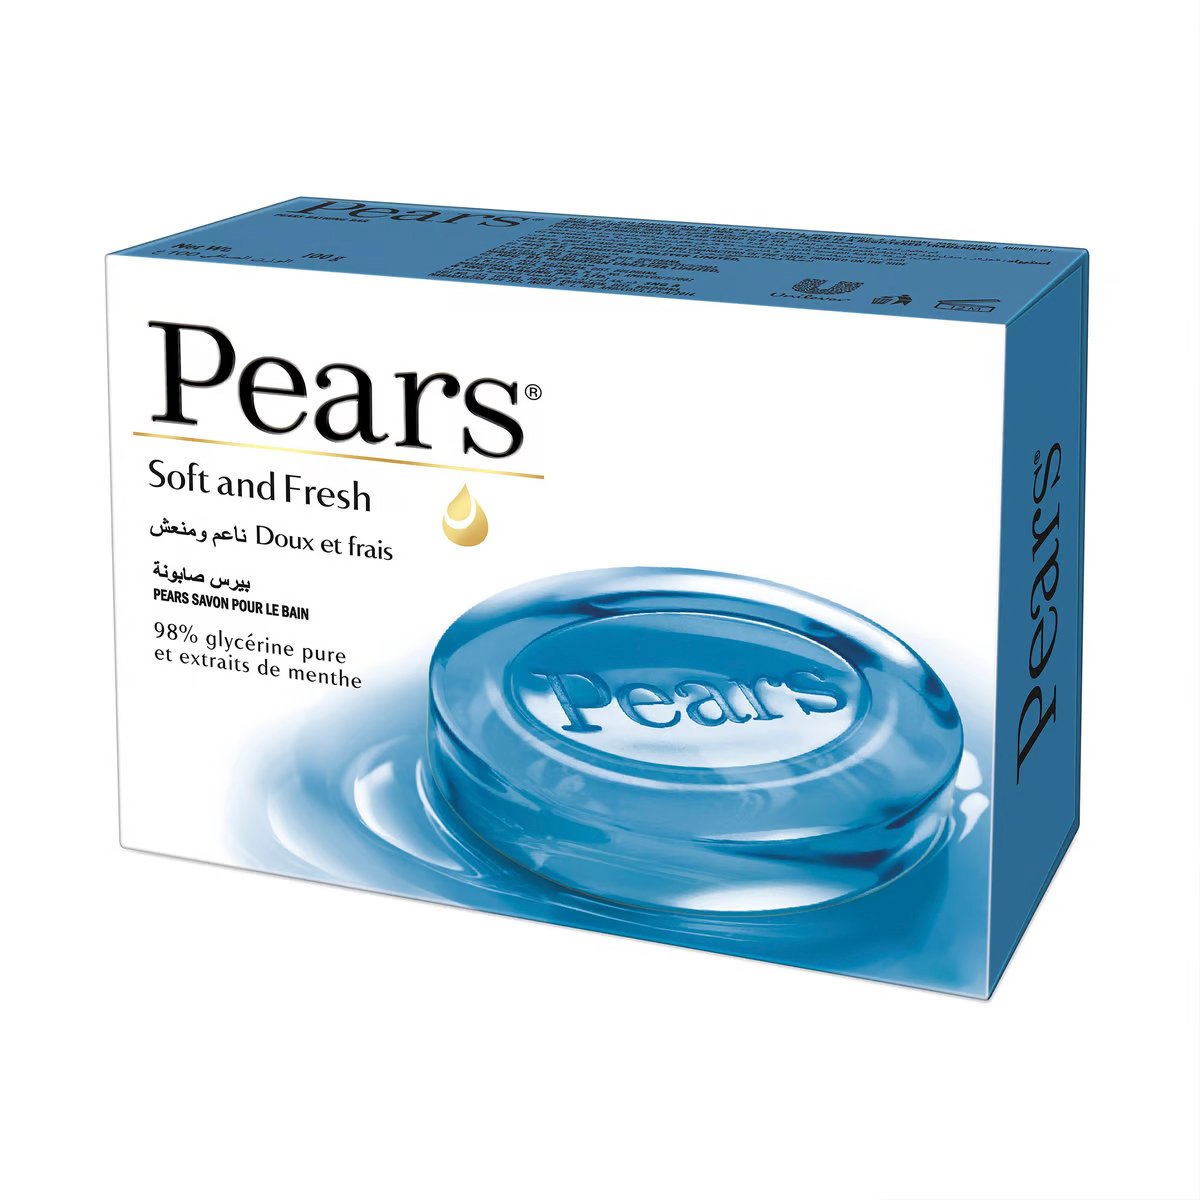 Pears Soft & Fresh Soap Bar with Mint Extracts 125 g